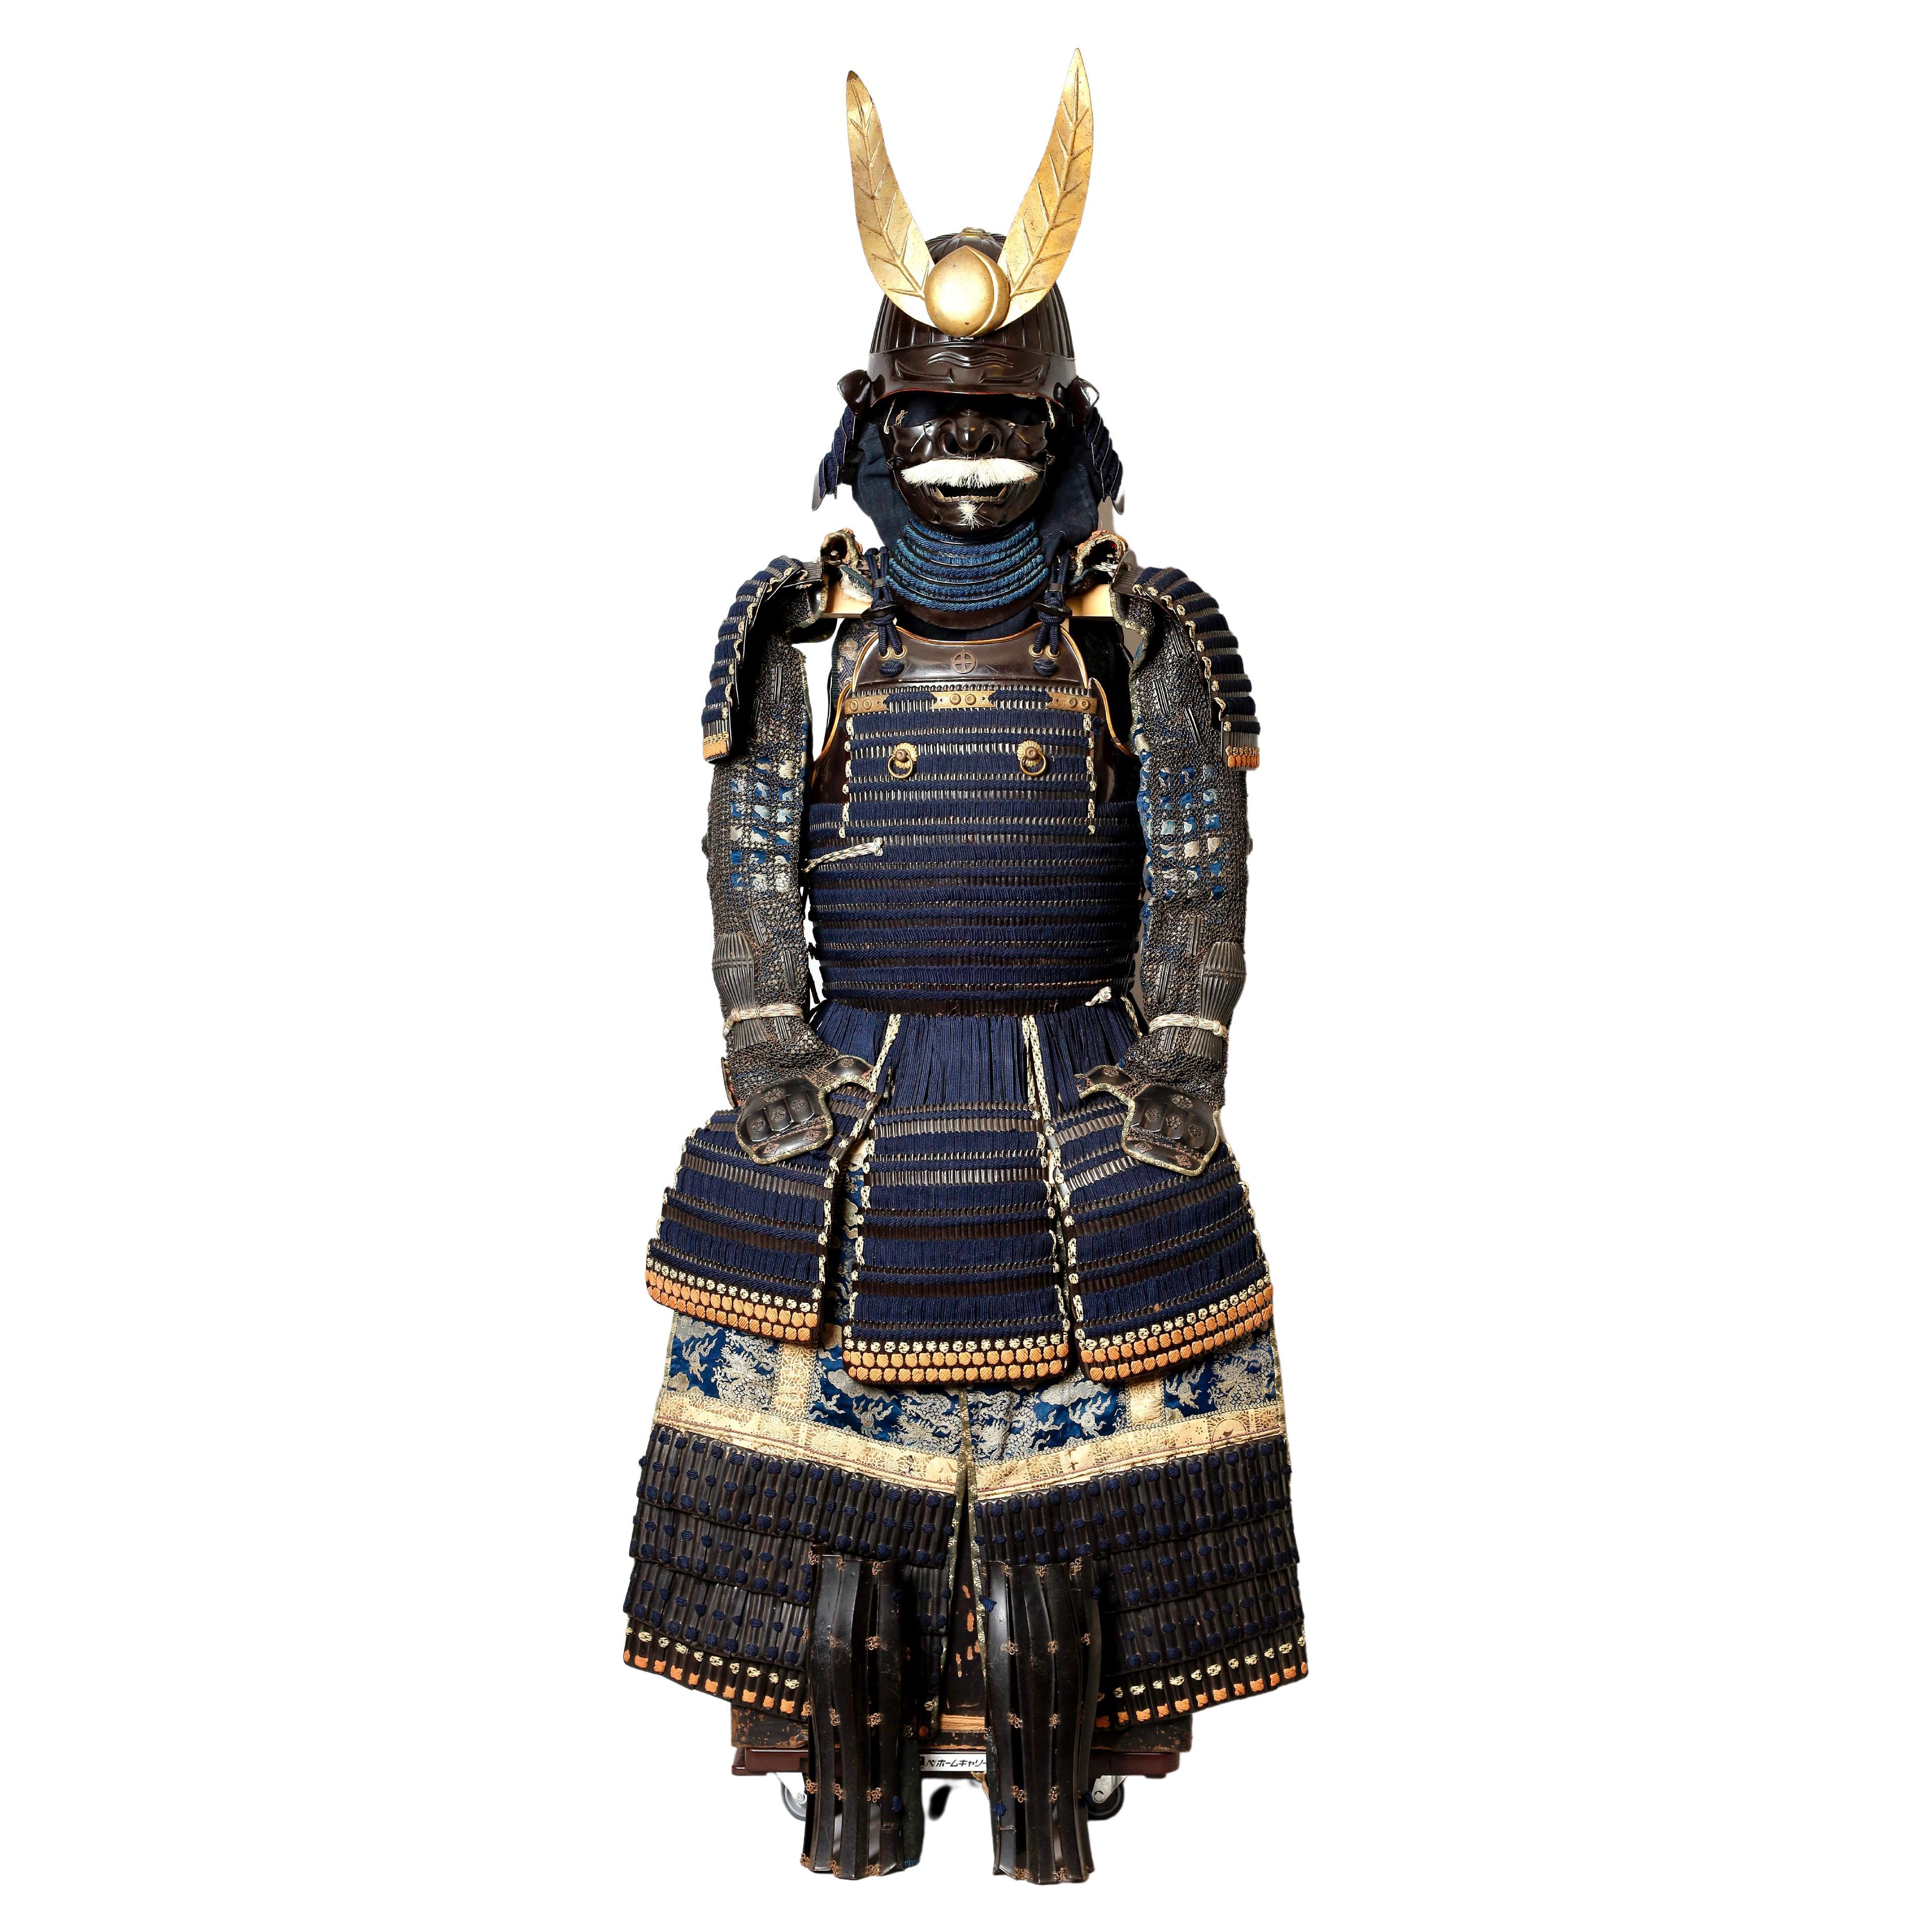 Introducing a truly exceptional piece of history - an 18th century Samurai armor set in almost pristine state of preservation. This set is accompanied by high grade Tokubetsu-kicho-shiryo papers, issued by the Association for the Research and